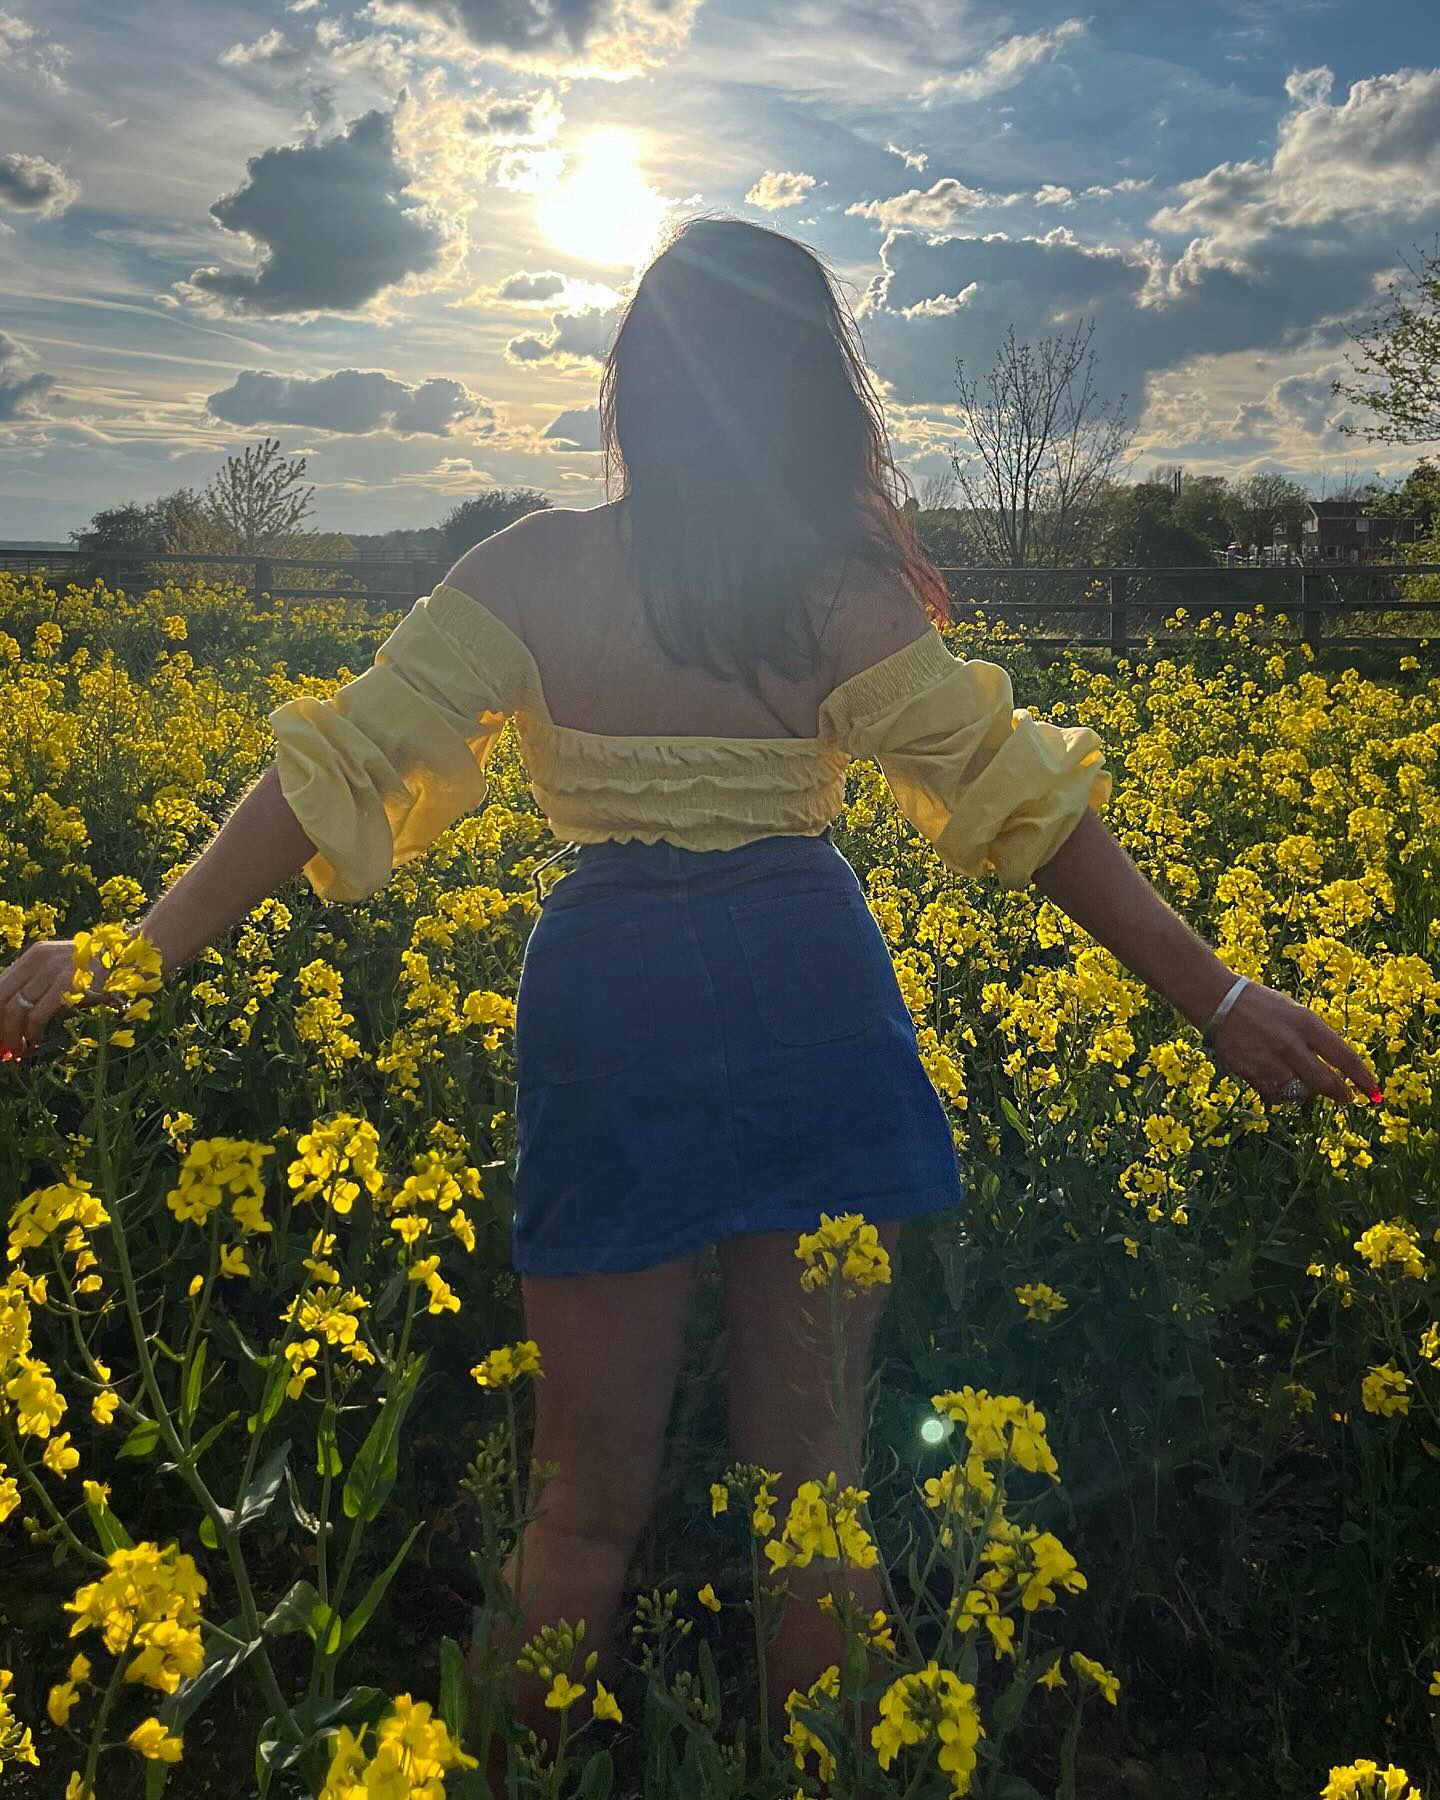 Golden dreams 💛🌿✨
Feeling romantic!🤩in fields of yellow 💫
Catching those rays at last some spring sunny days! ☀️ it was a bit windy but so beautiful! Yellow is definitely a happy colour! Had so much fun taking these pics, especially in heels !🤪🤣 there’s a funny story behind these photos ( I will tell it in my channel) 

Captured these shots as the sun was going down , do you like ?🤔
Swipe for more glowing golden girl views ! 🤩🔚 

Yellow crop top with floaty sleeves & Short denim skirt 💛
.
.
.
.
.
.
.

#romantic #croptop #yellow #sunset #style #spring #ss24 #denimskirt #brunette #photography #sunshine